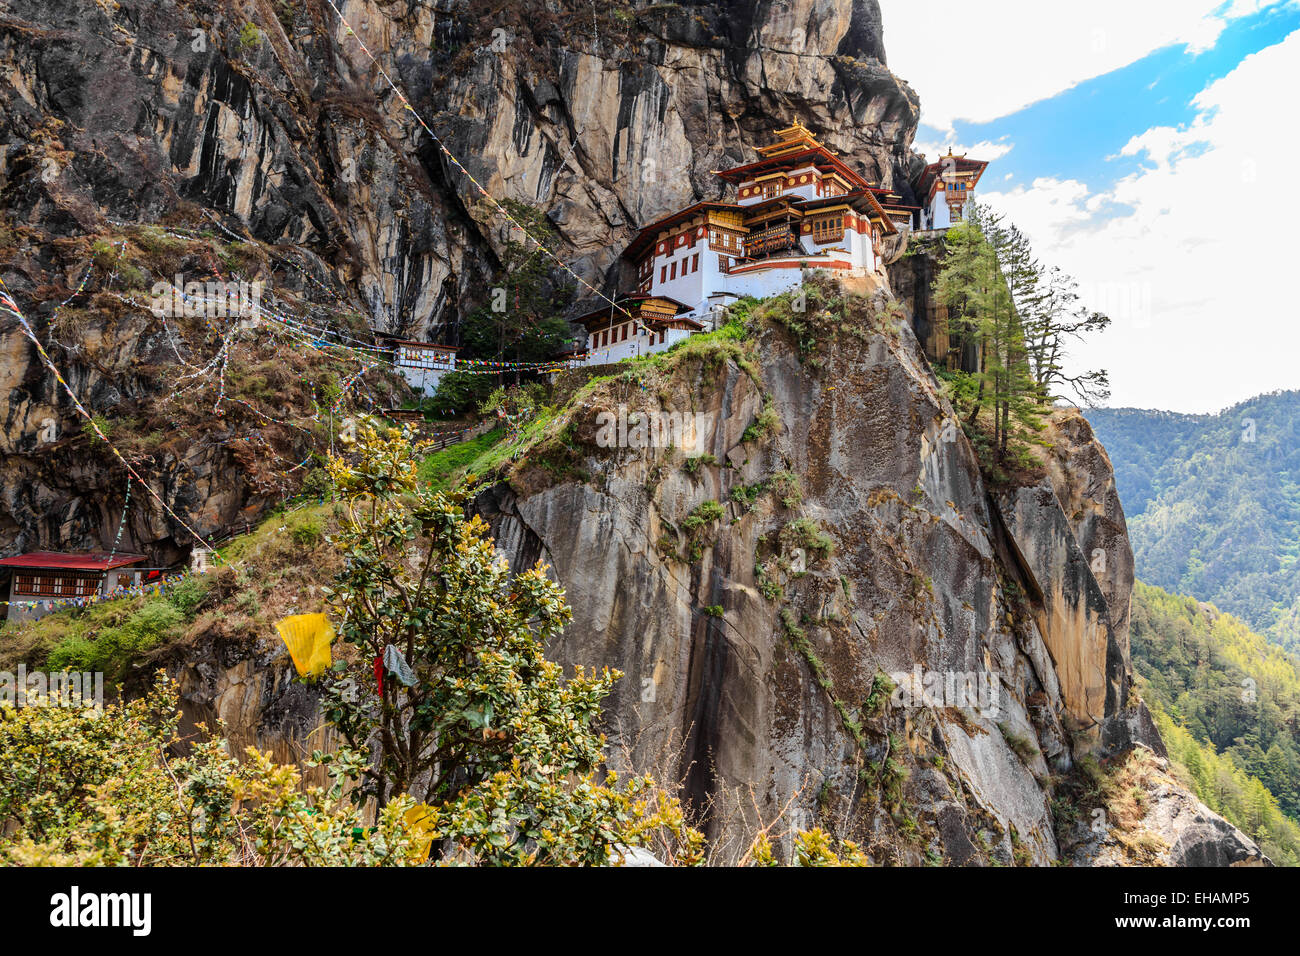 Paro Taktsang Monastery is the most famous of Bhutan Monasteries located in the cliffside of Paro valley in Bhutan Stock Photo